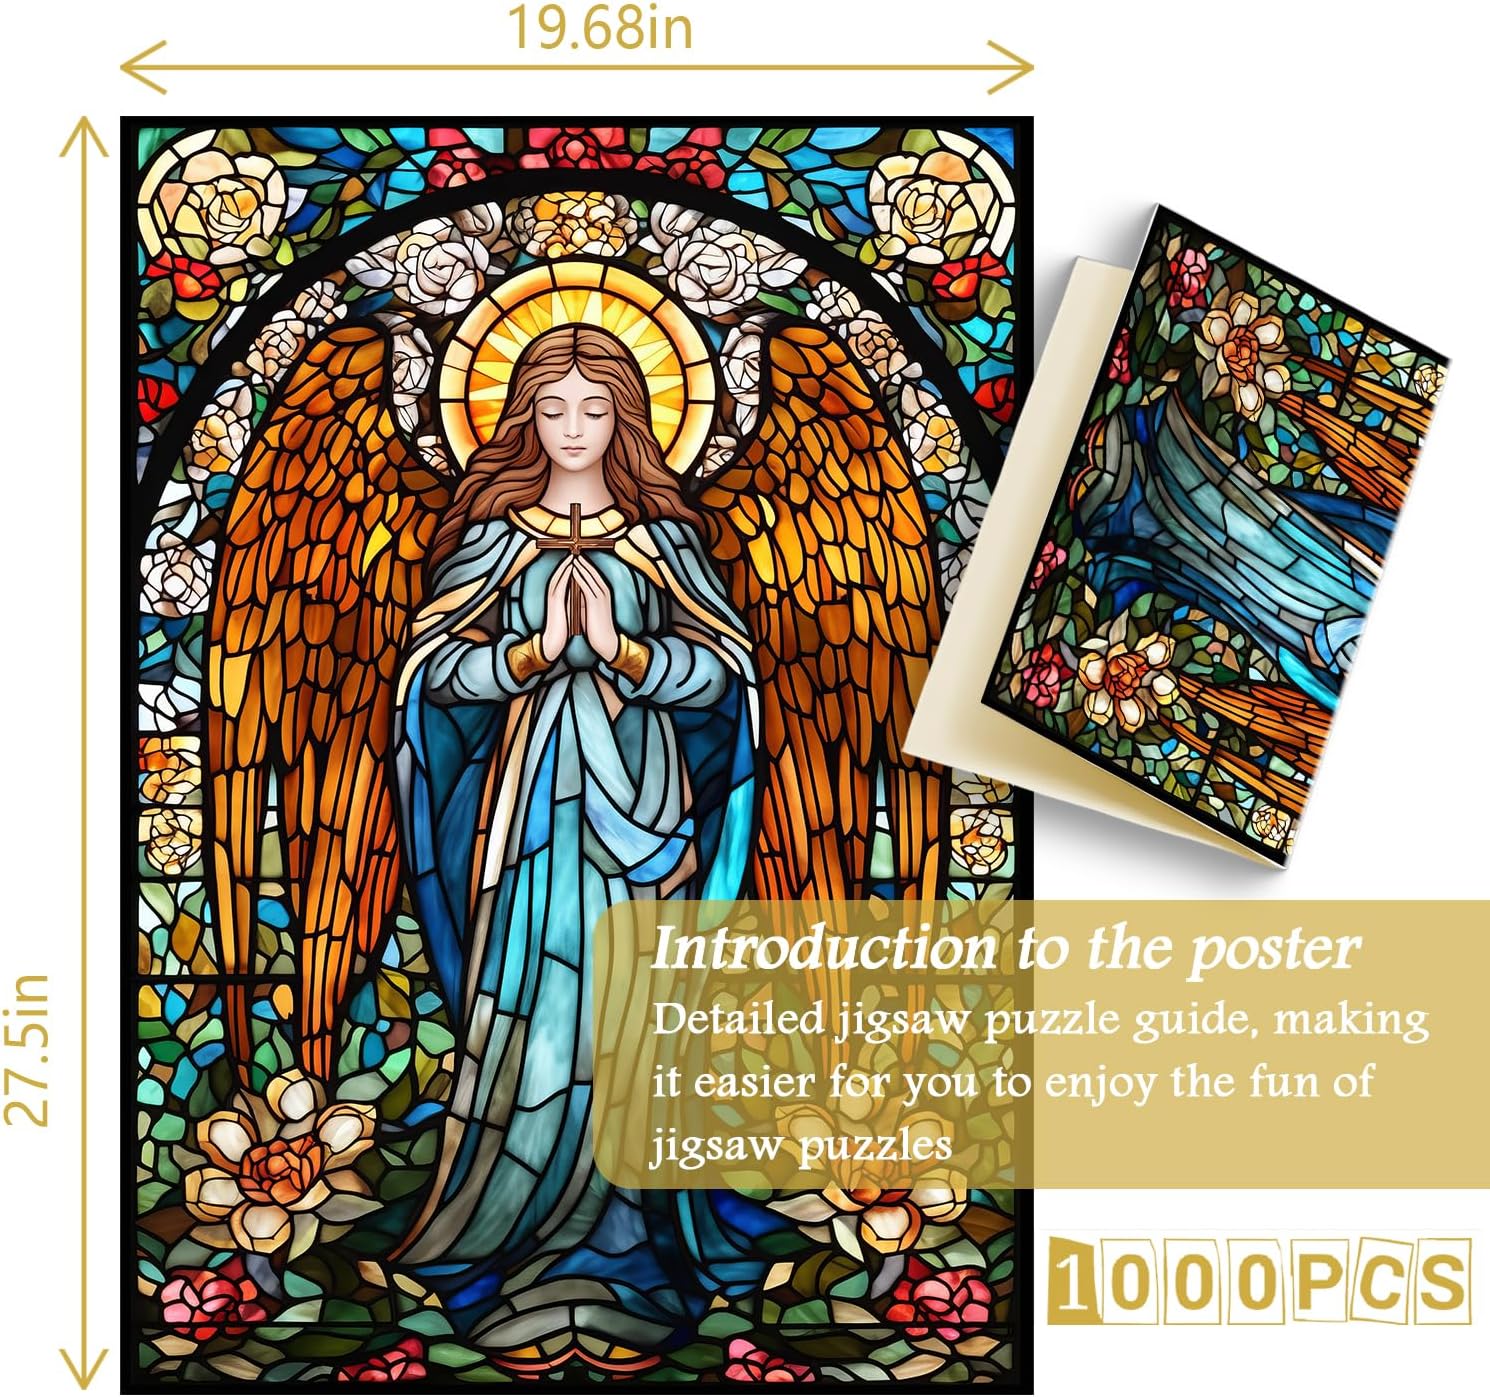 Angel Blessing Jigsaw Puzzle 1000 Piece